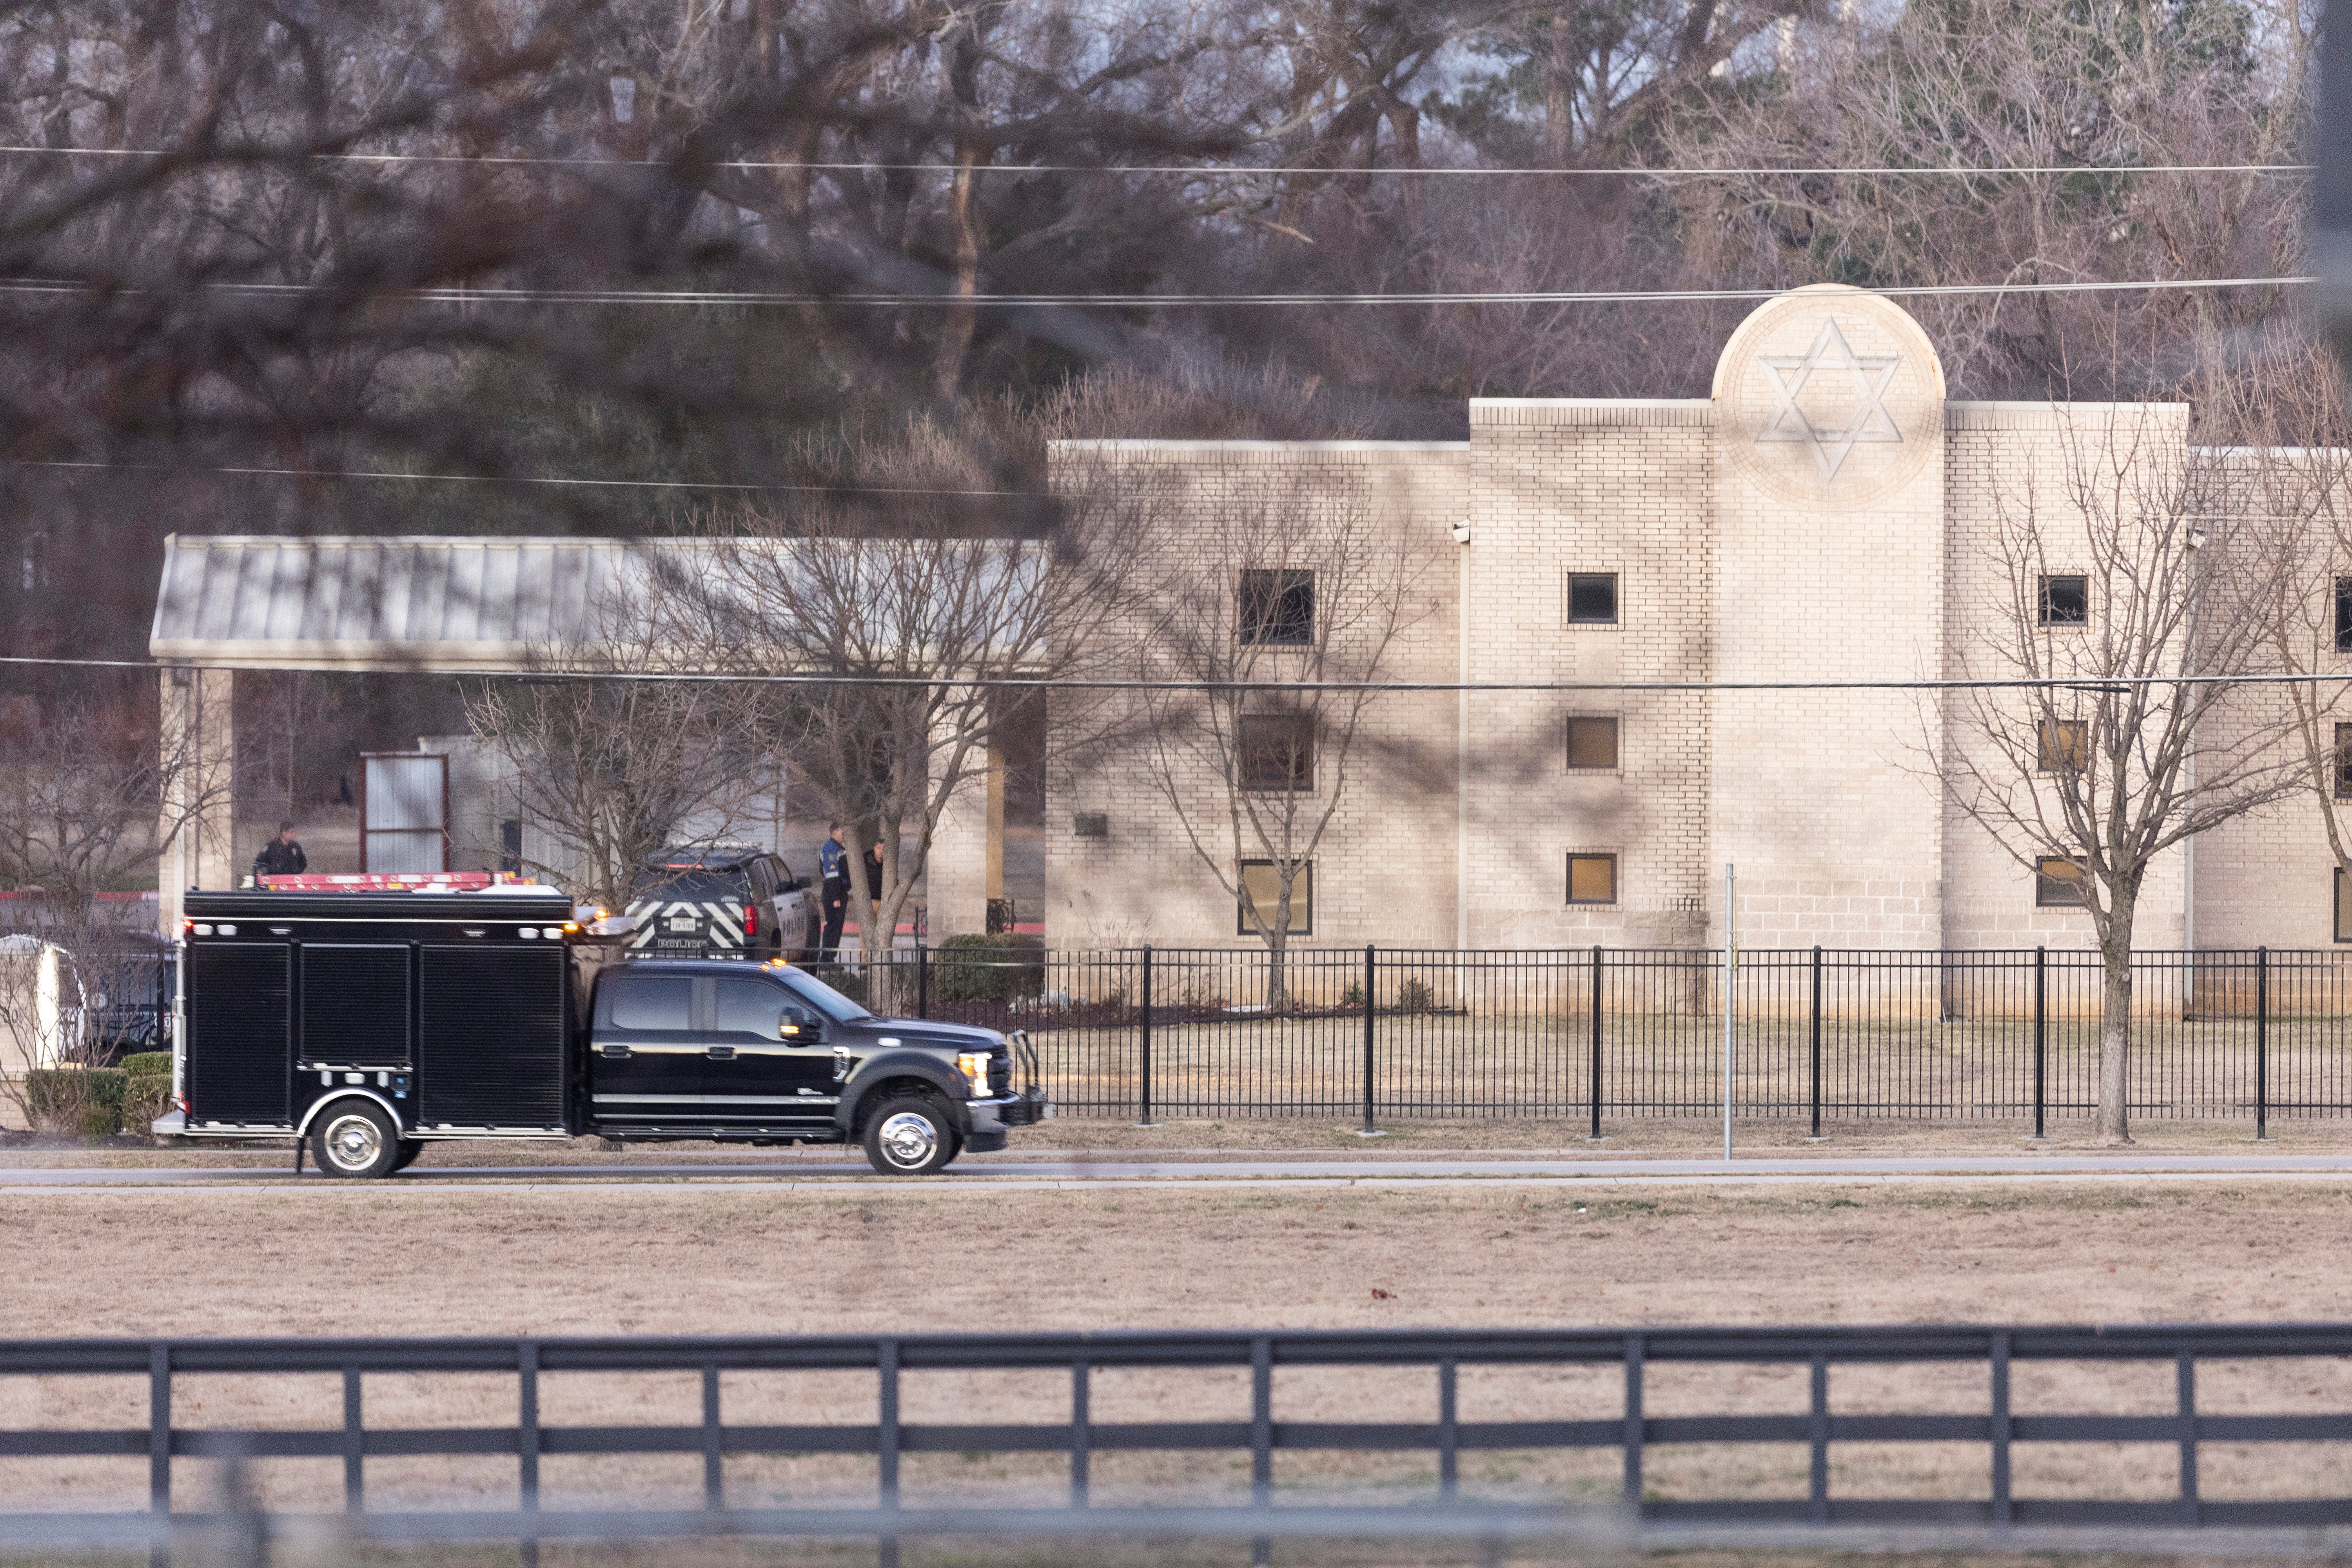 The hostages were held at the synagogue for more than 10 hours (Brandon Wade/AP)